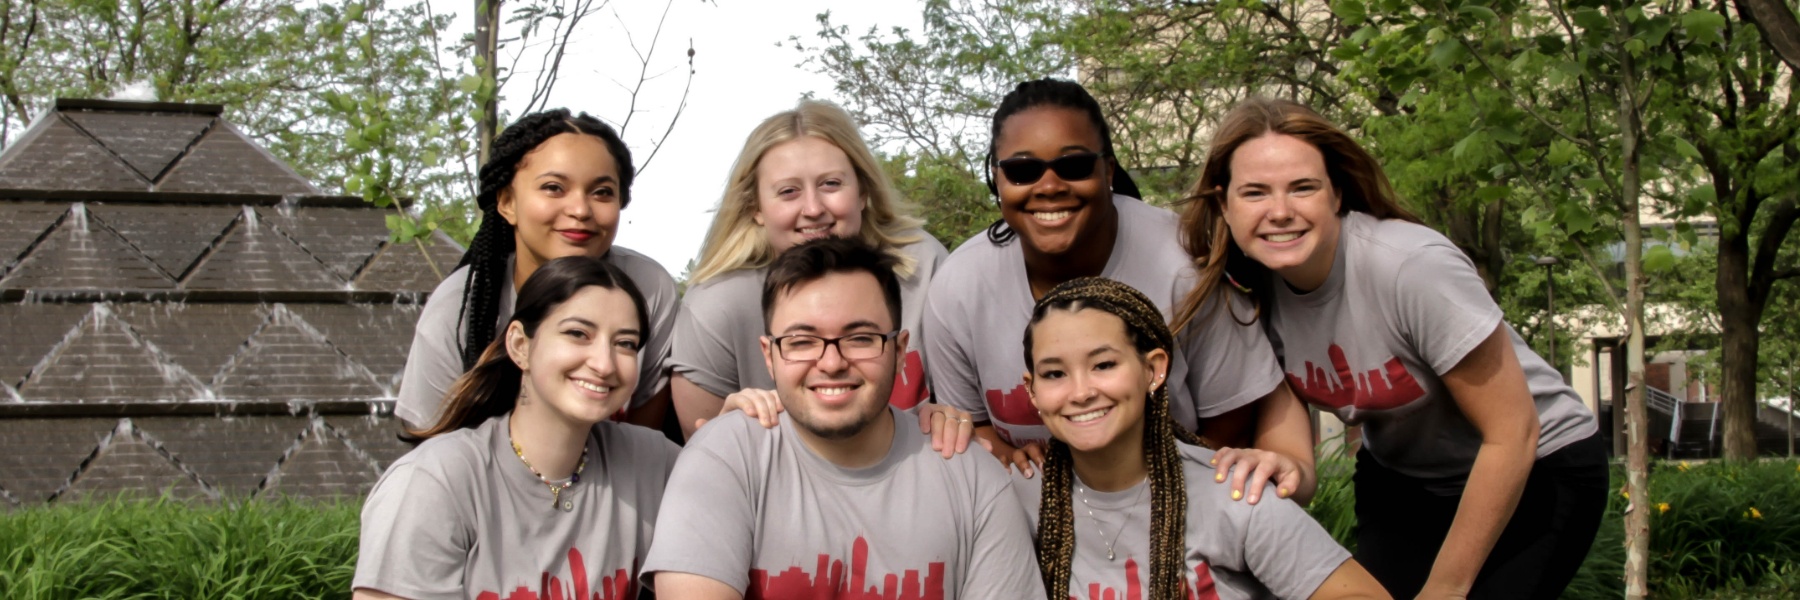 Image of seven Peer Advisors in front of the Pyramid fountain on the IUPUI campus.